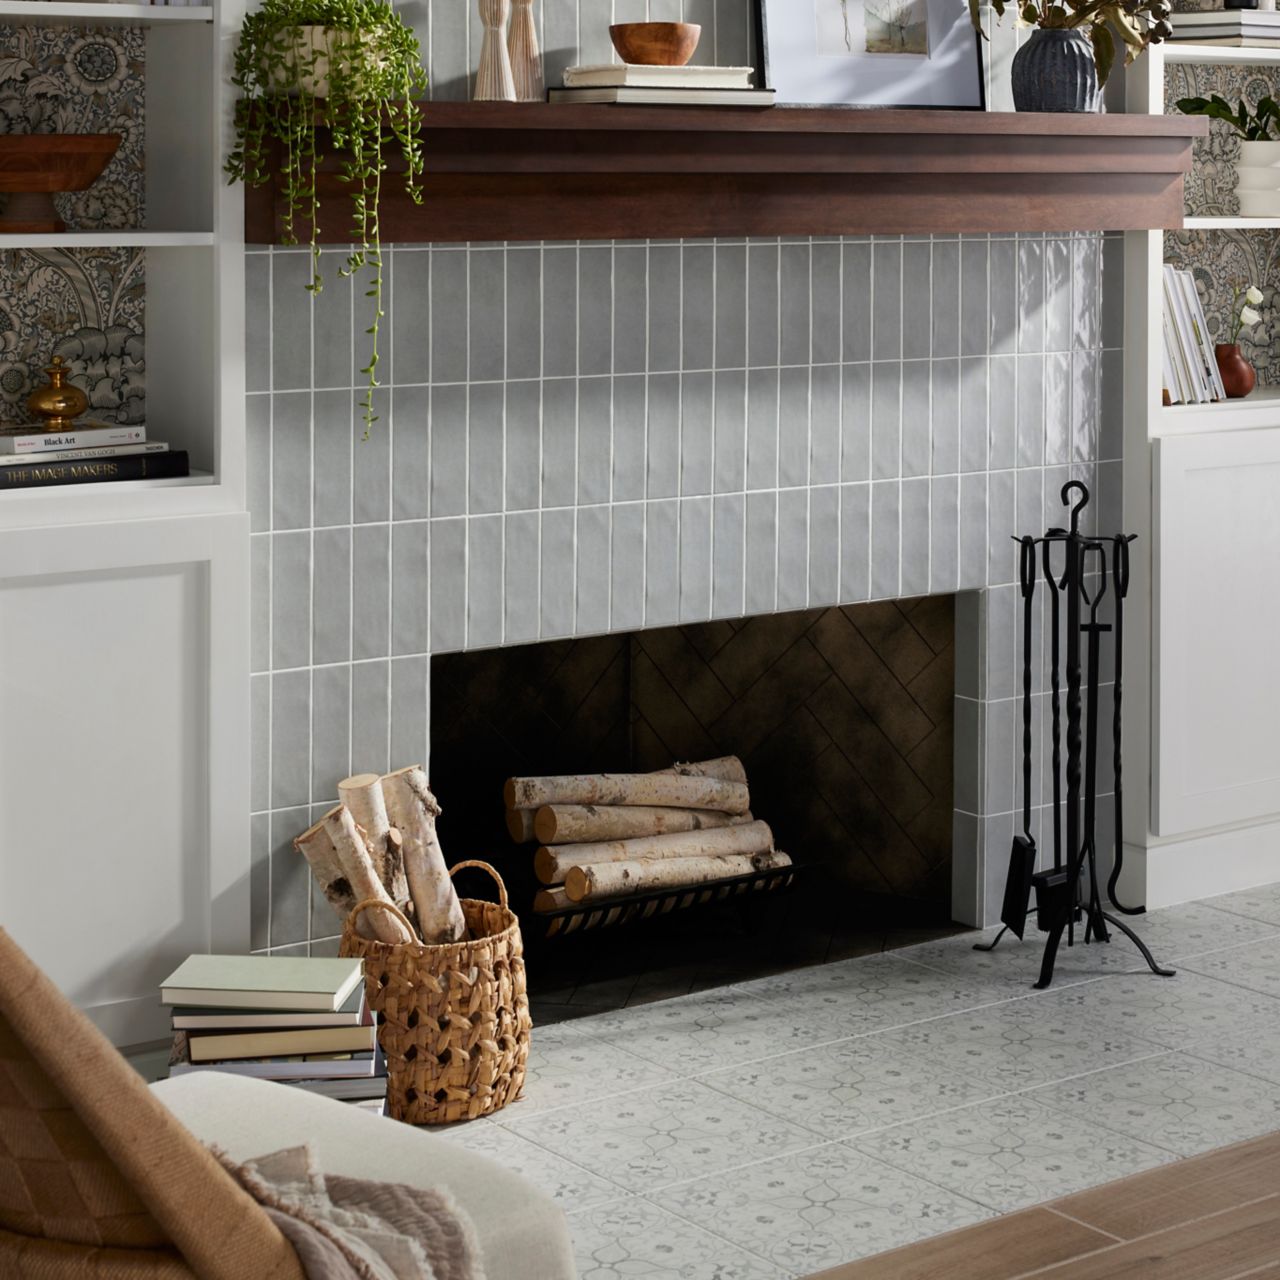 Living Room with a fireplace with Morris and Co. Hawkdale Pure Cloud Subway tile on the wall, Morris and Co. Pure Net Cloud Floor tile on the hearth, and Solna Natural Wood Look Floor Tile